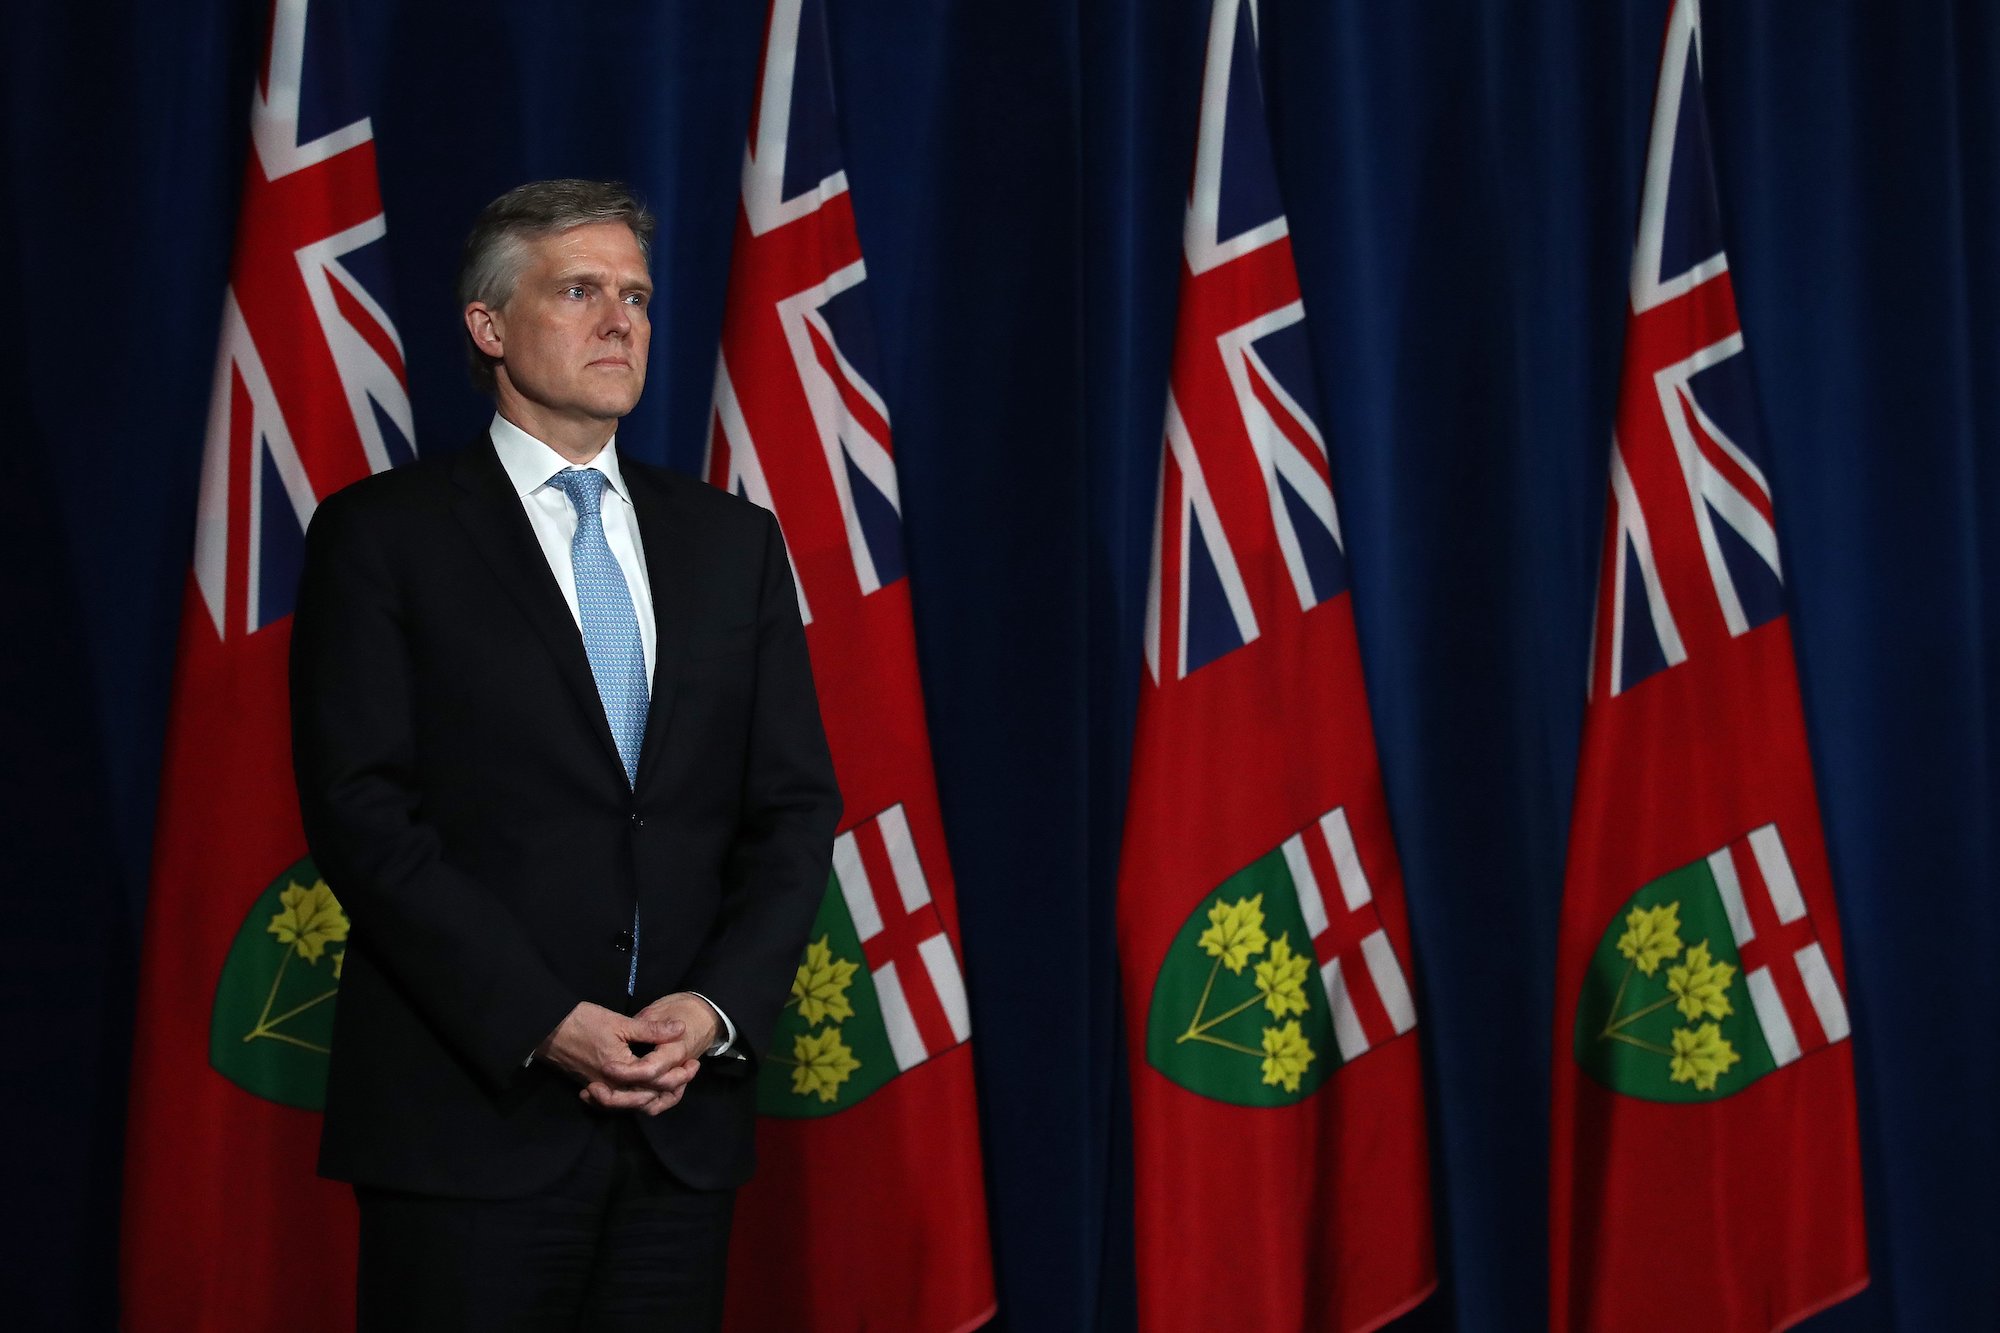 Minister announces $100 million aimed at attracting new long-term care staff